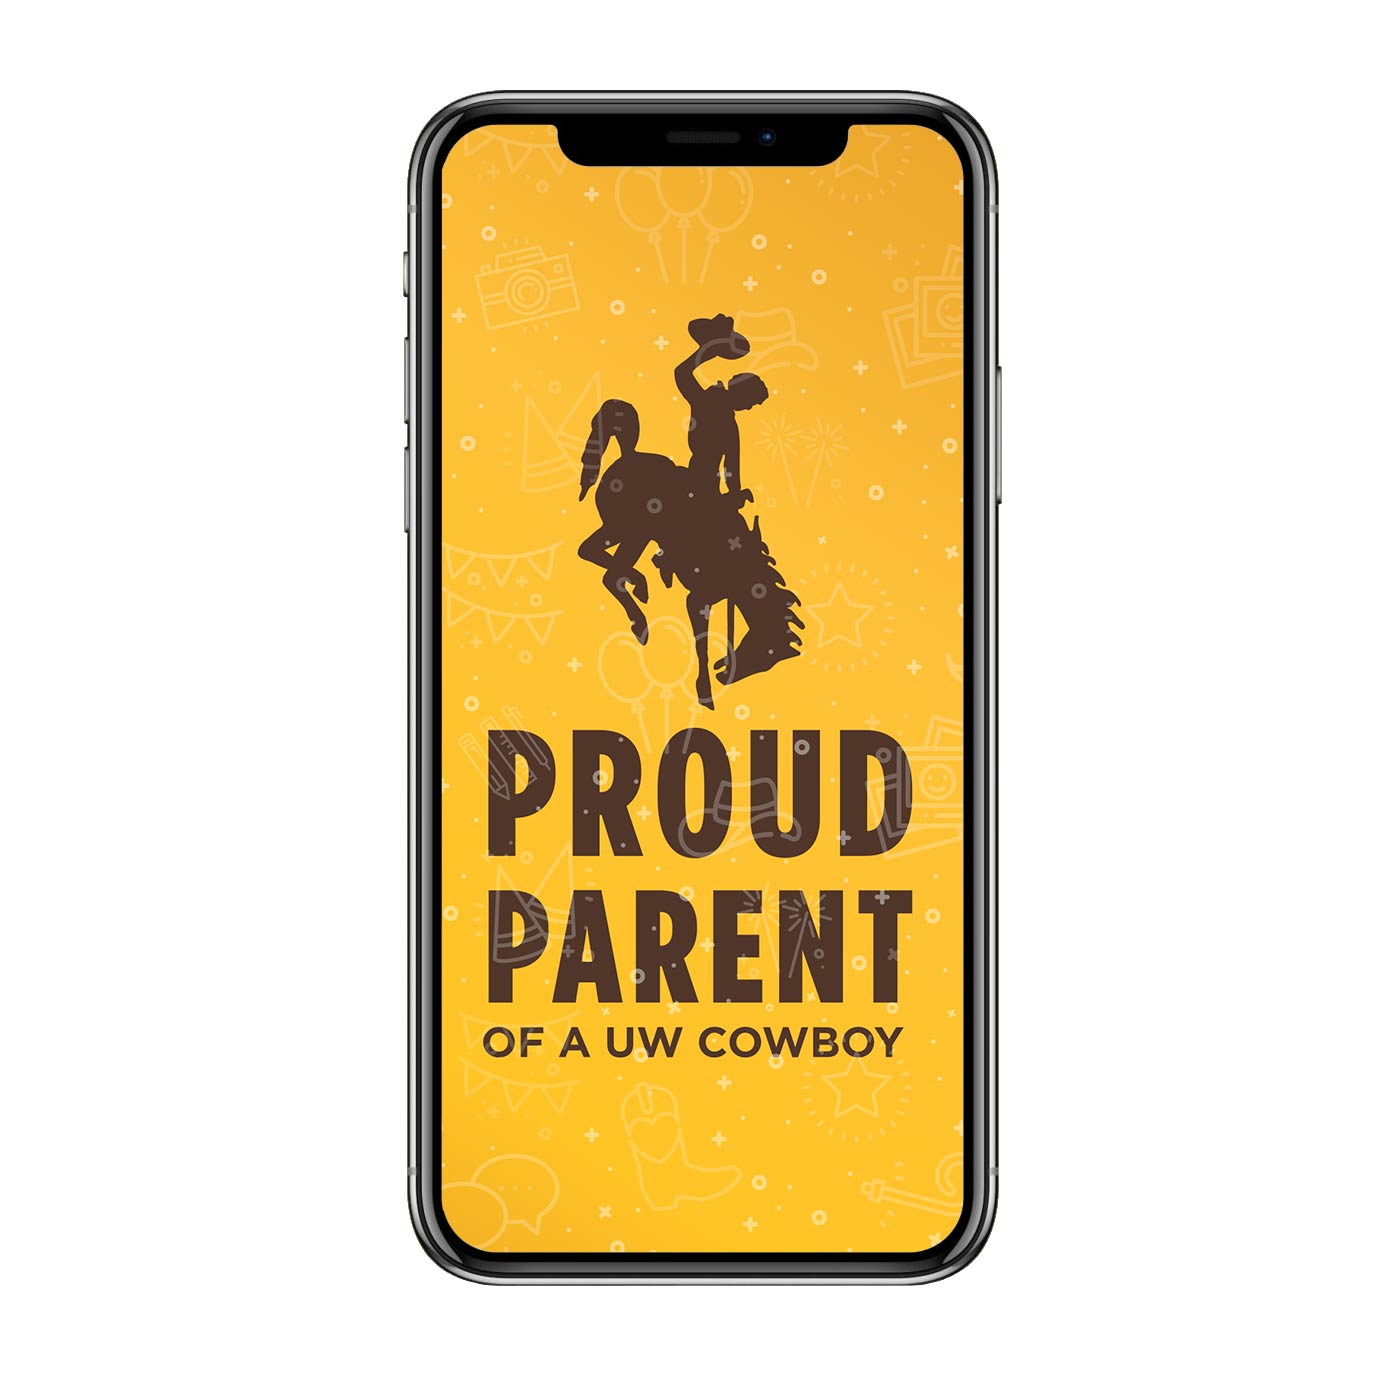 An iPhone screen with the words Proud Parent of UW Cowboy